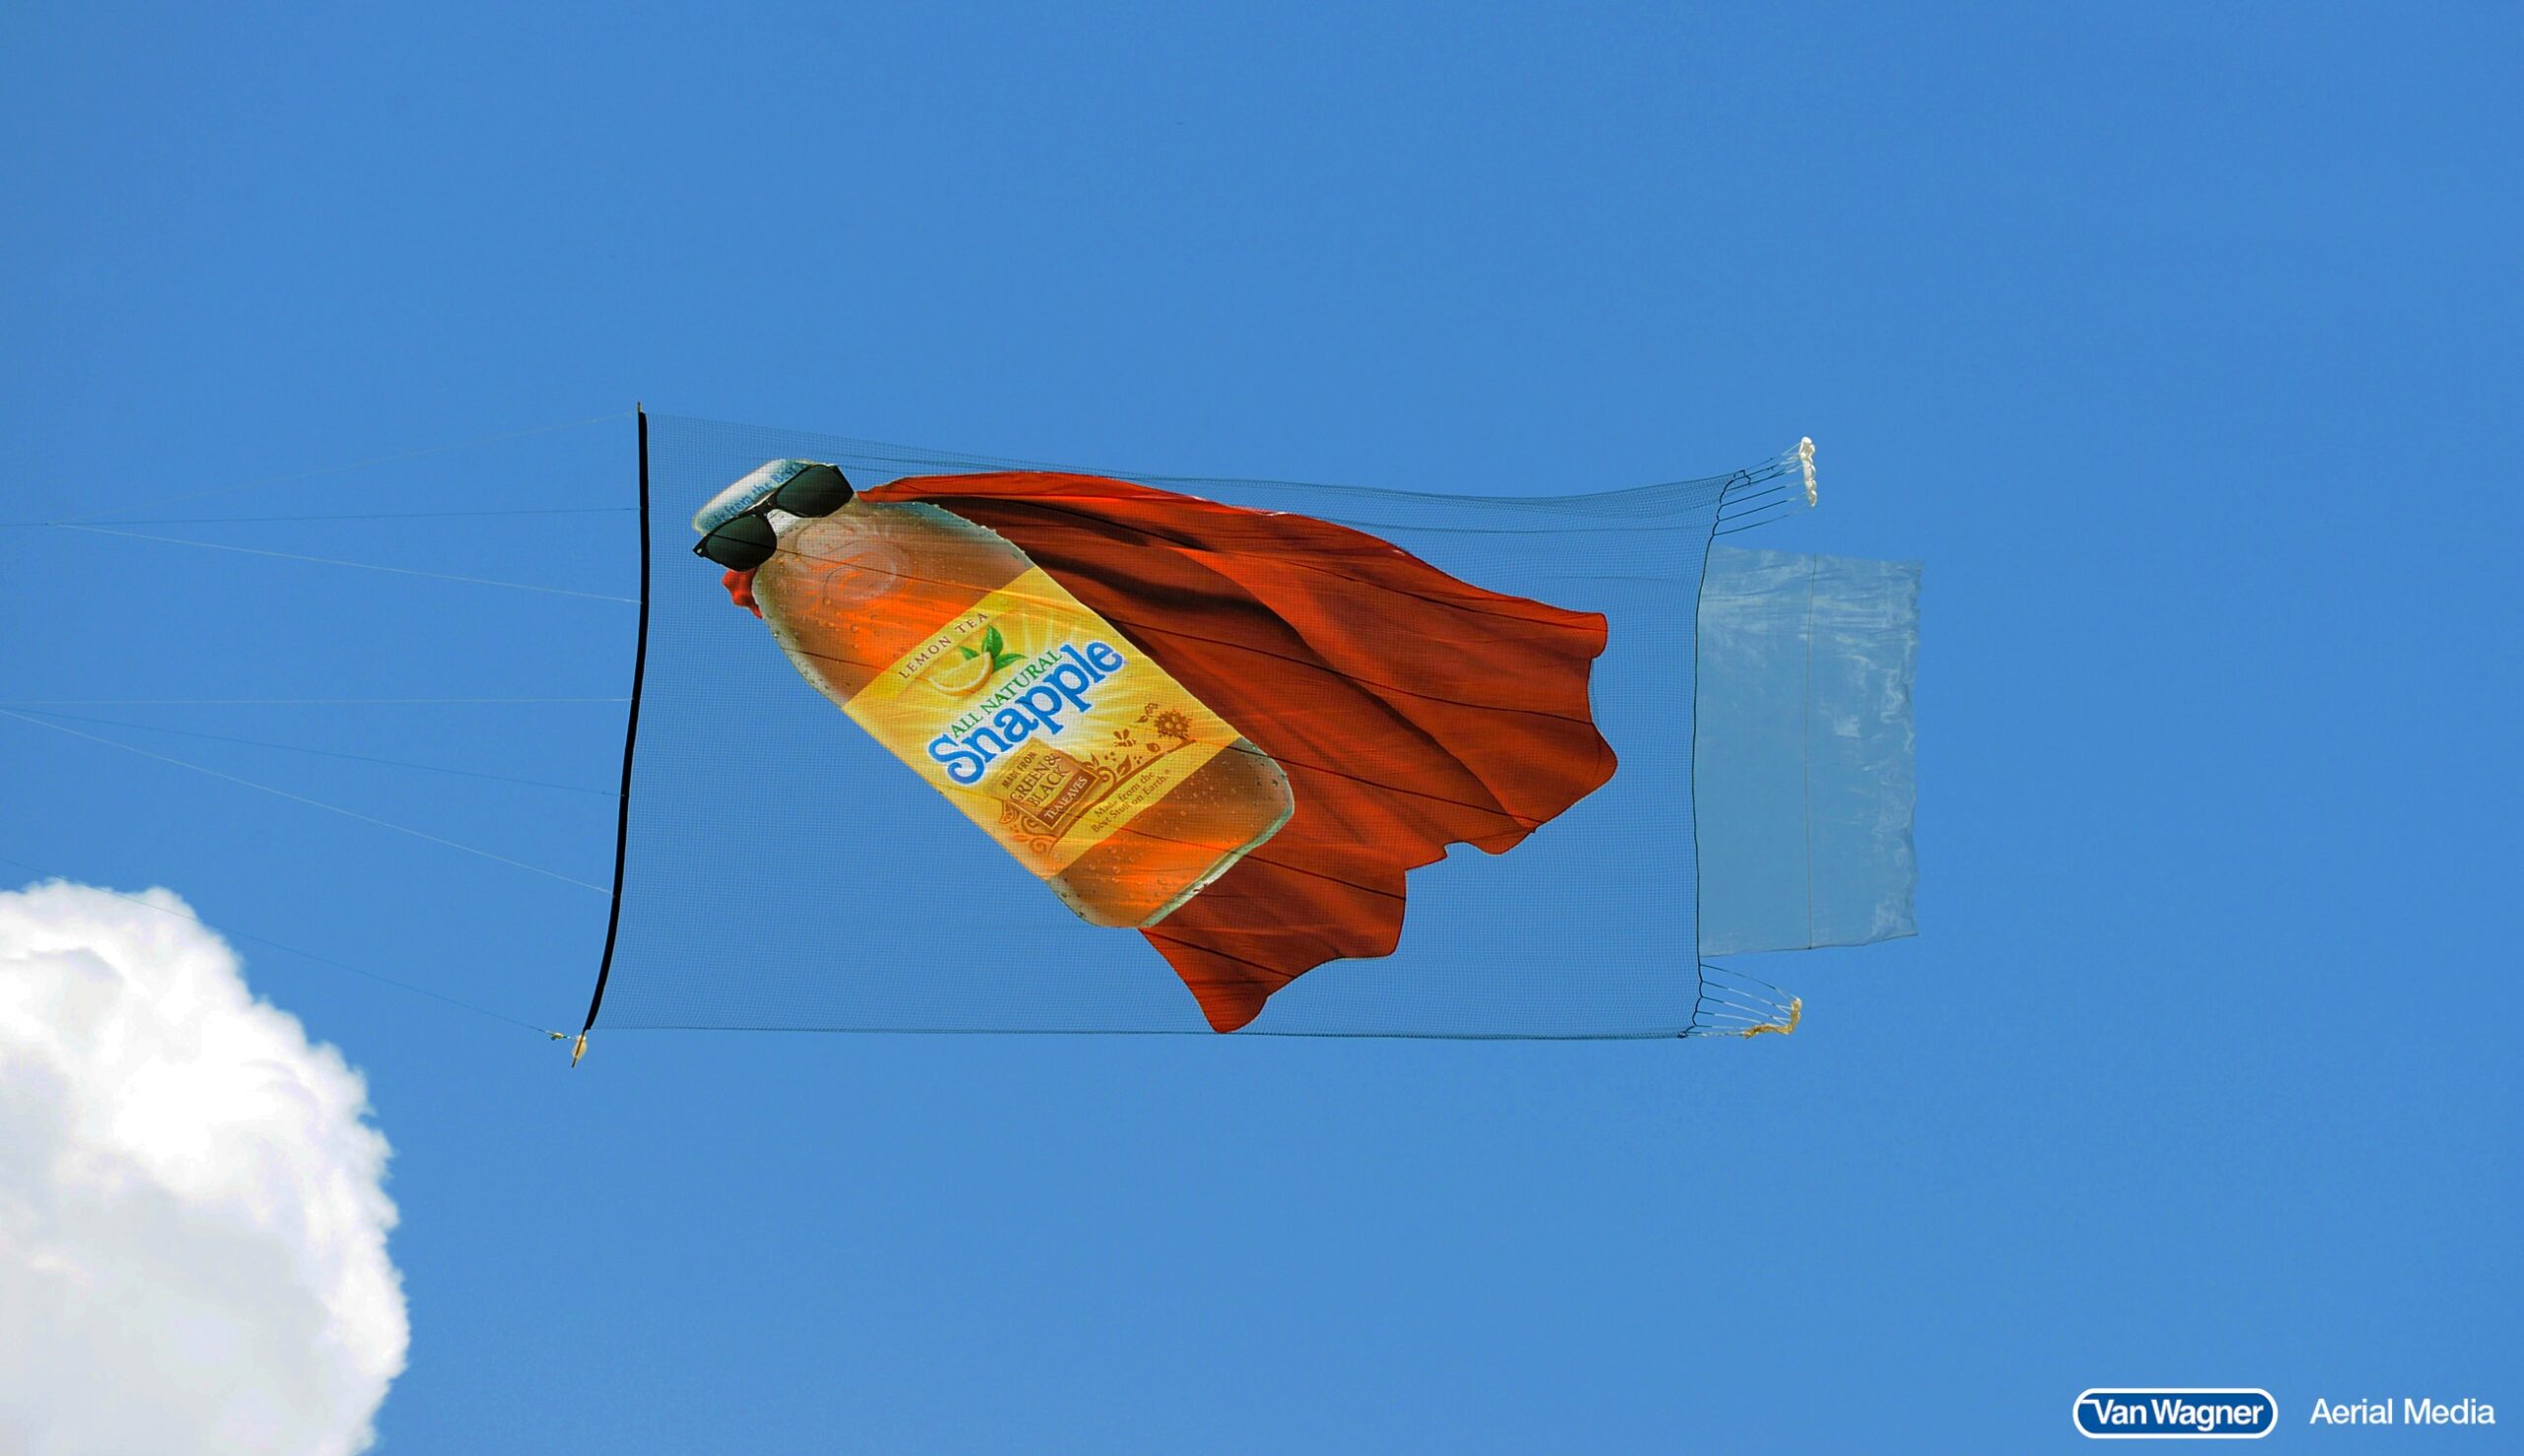 How To Fly Air Banners In Your State | Aerial Advertising featured image